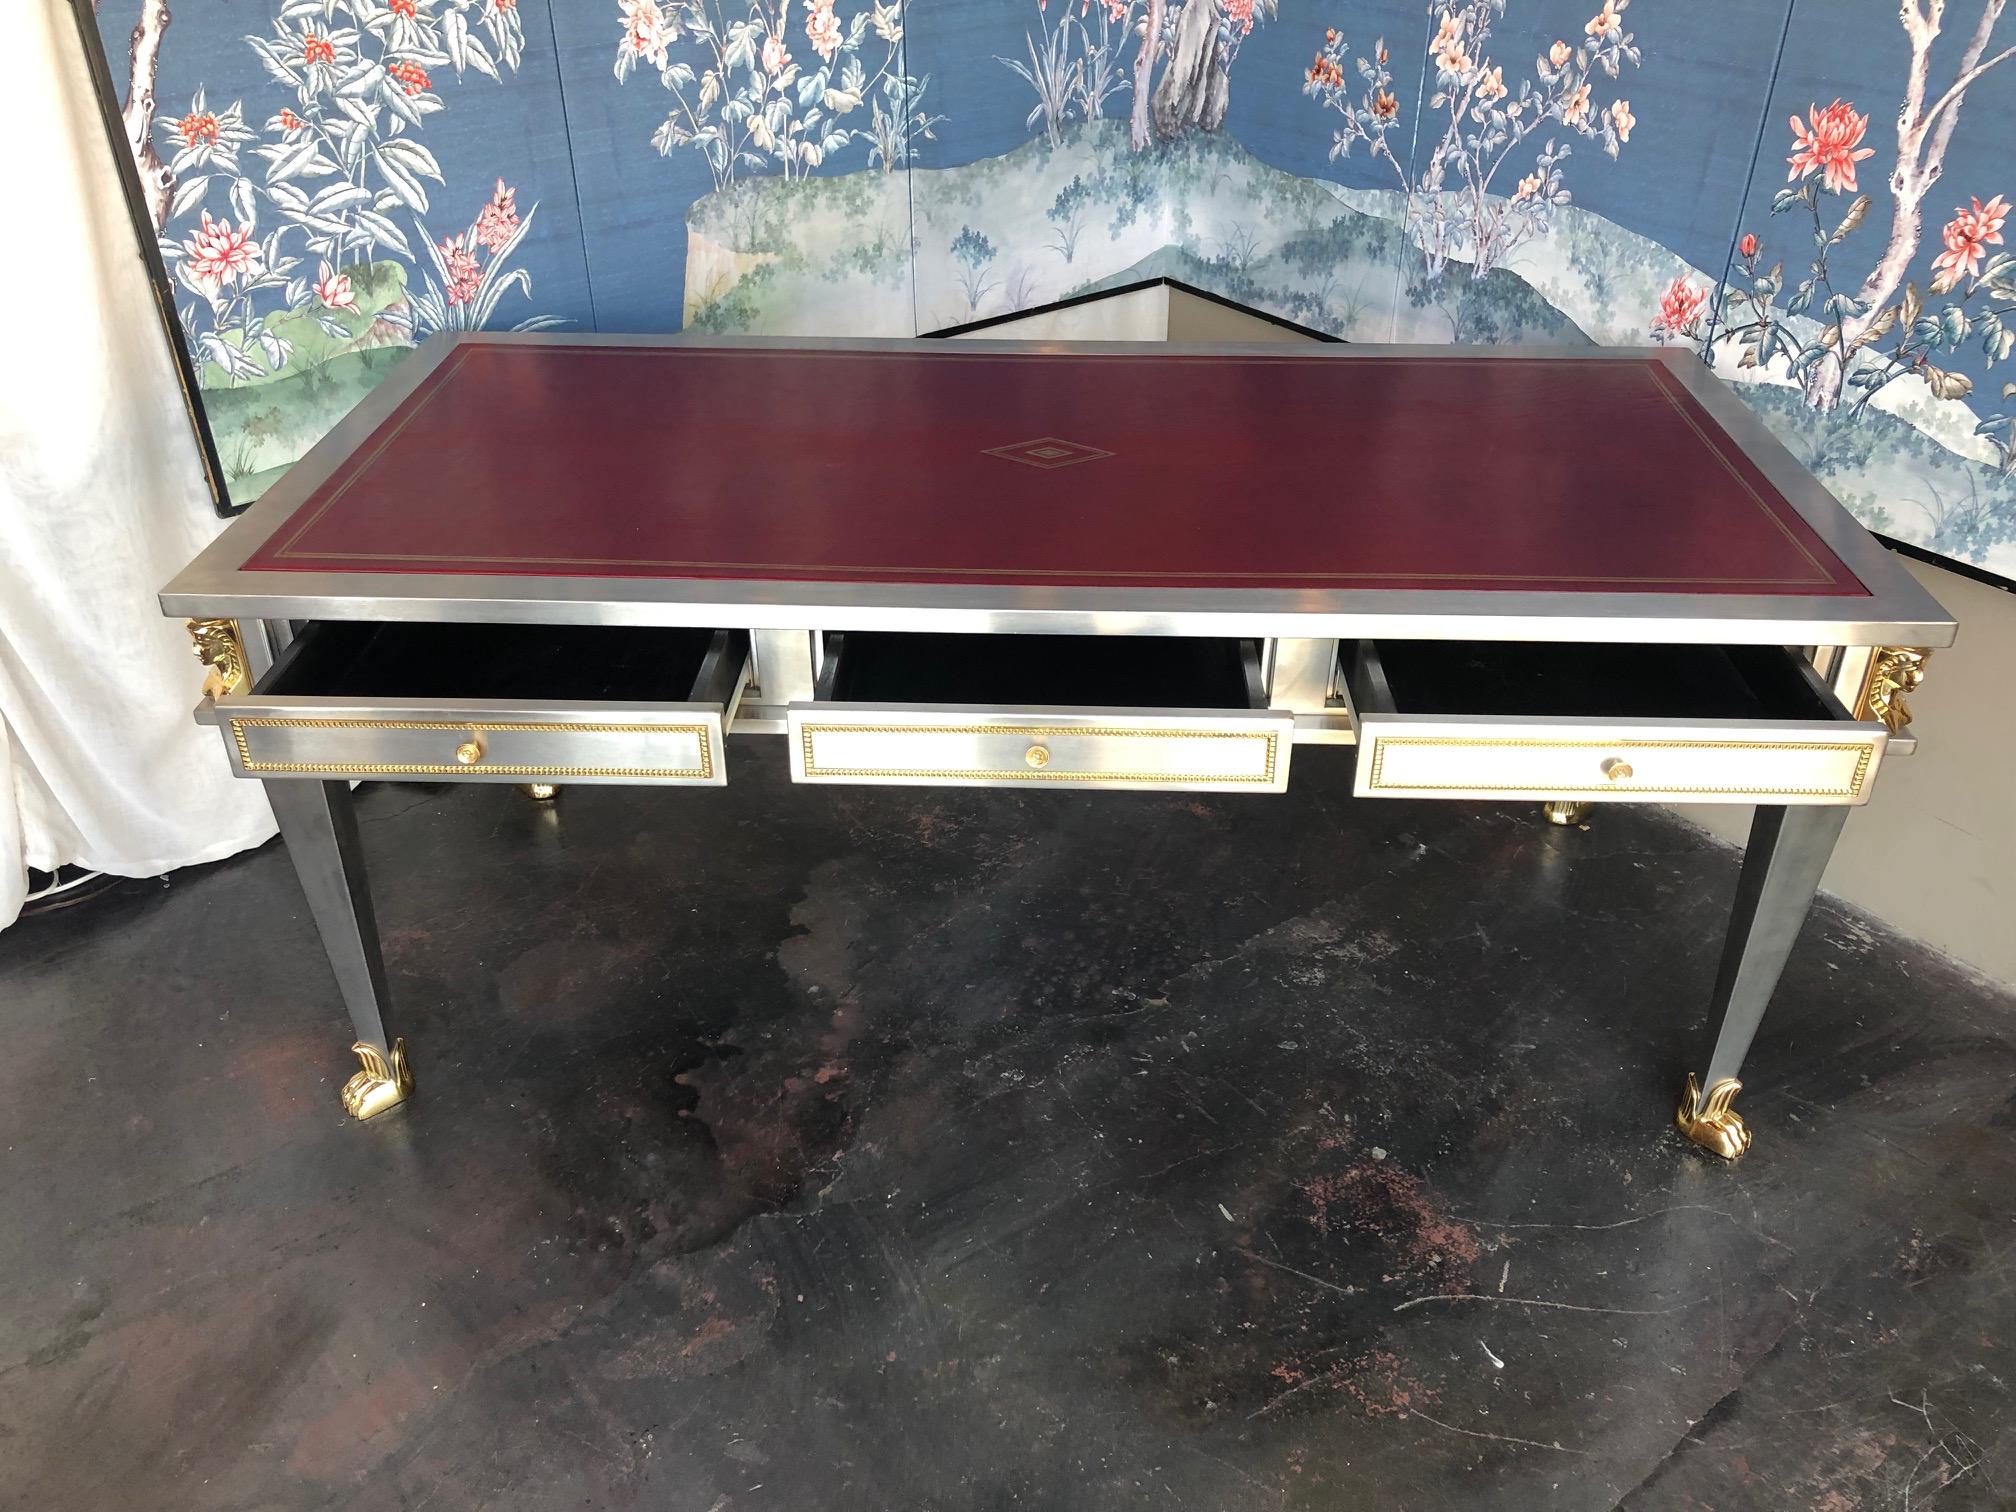 Stainless steel and bronze desk. With red leather top. By John Vesey.